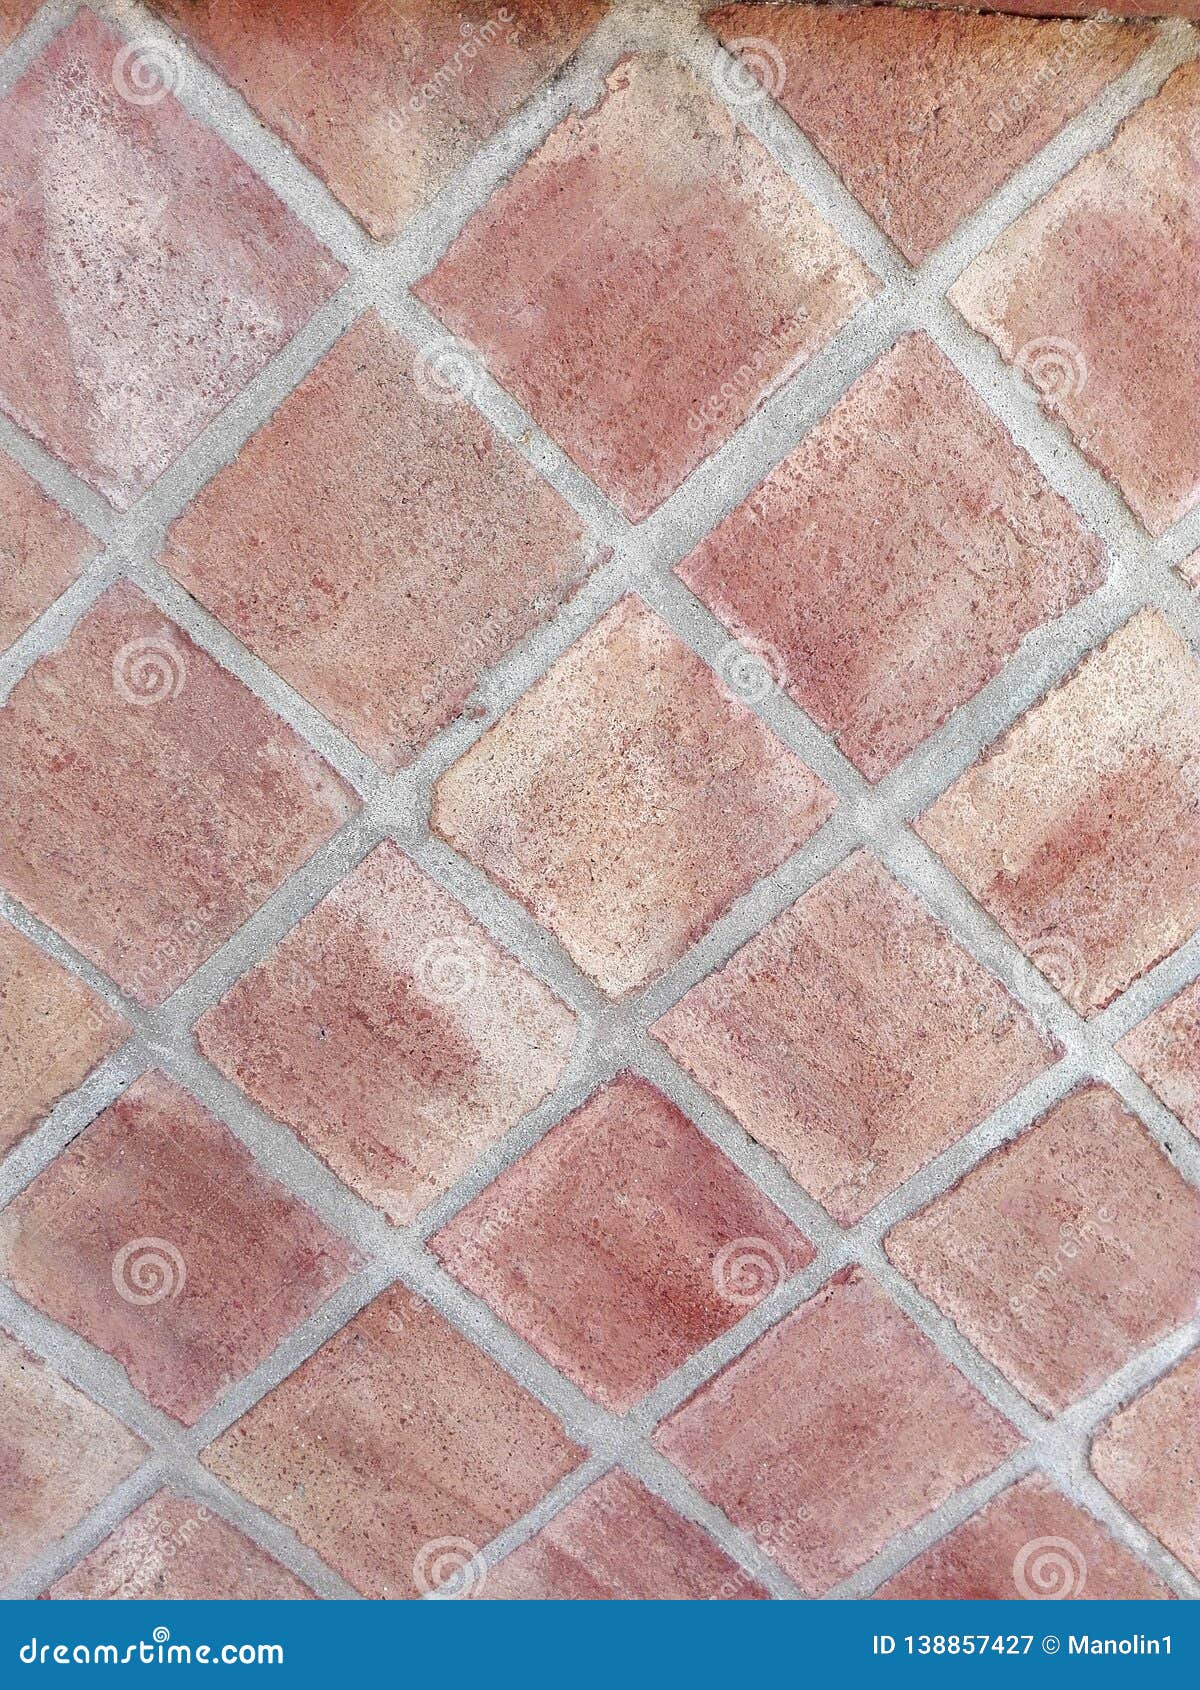 wall formed by clay tiles